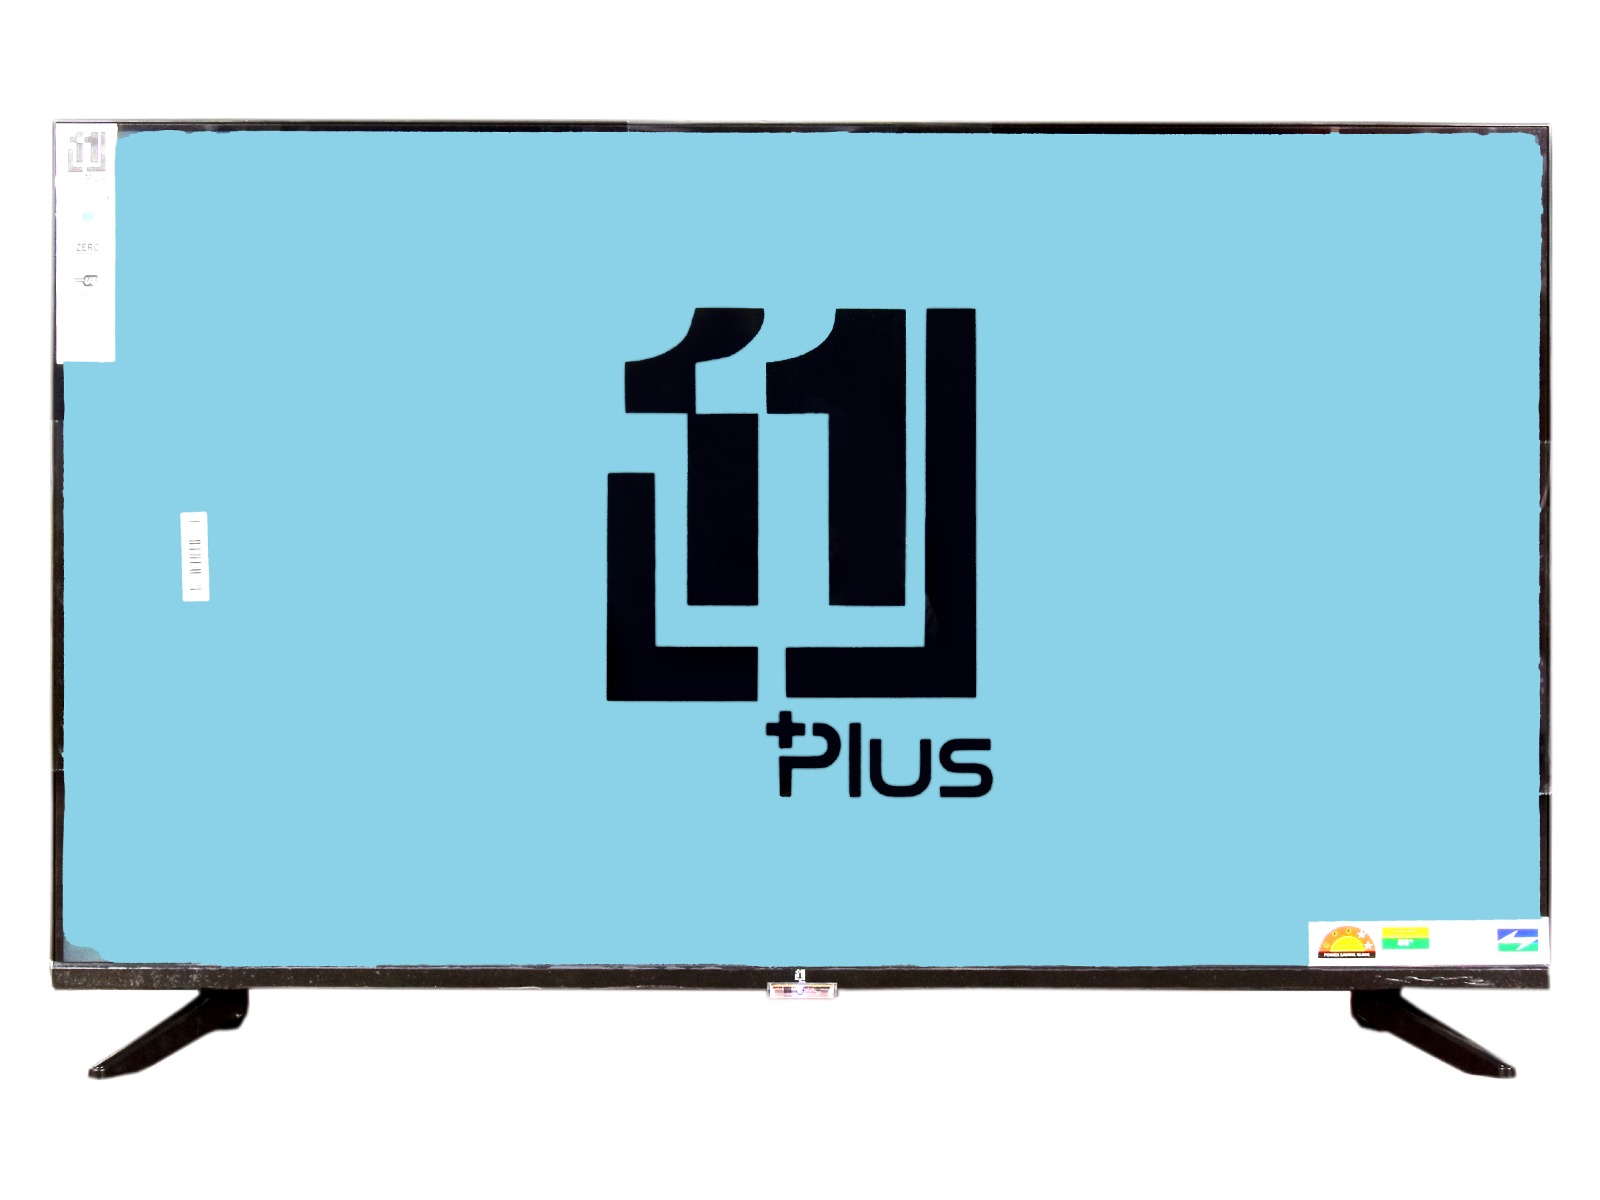 11 Plus 113210 139 cm (50 inch) Ultra HD (4K) LED Smart Android